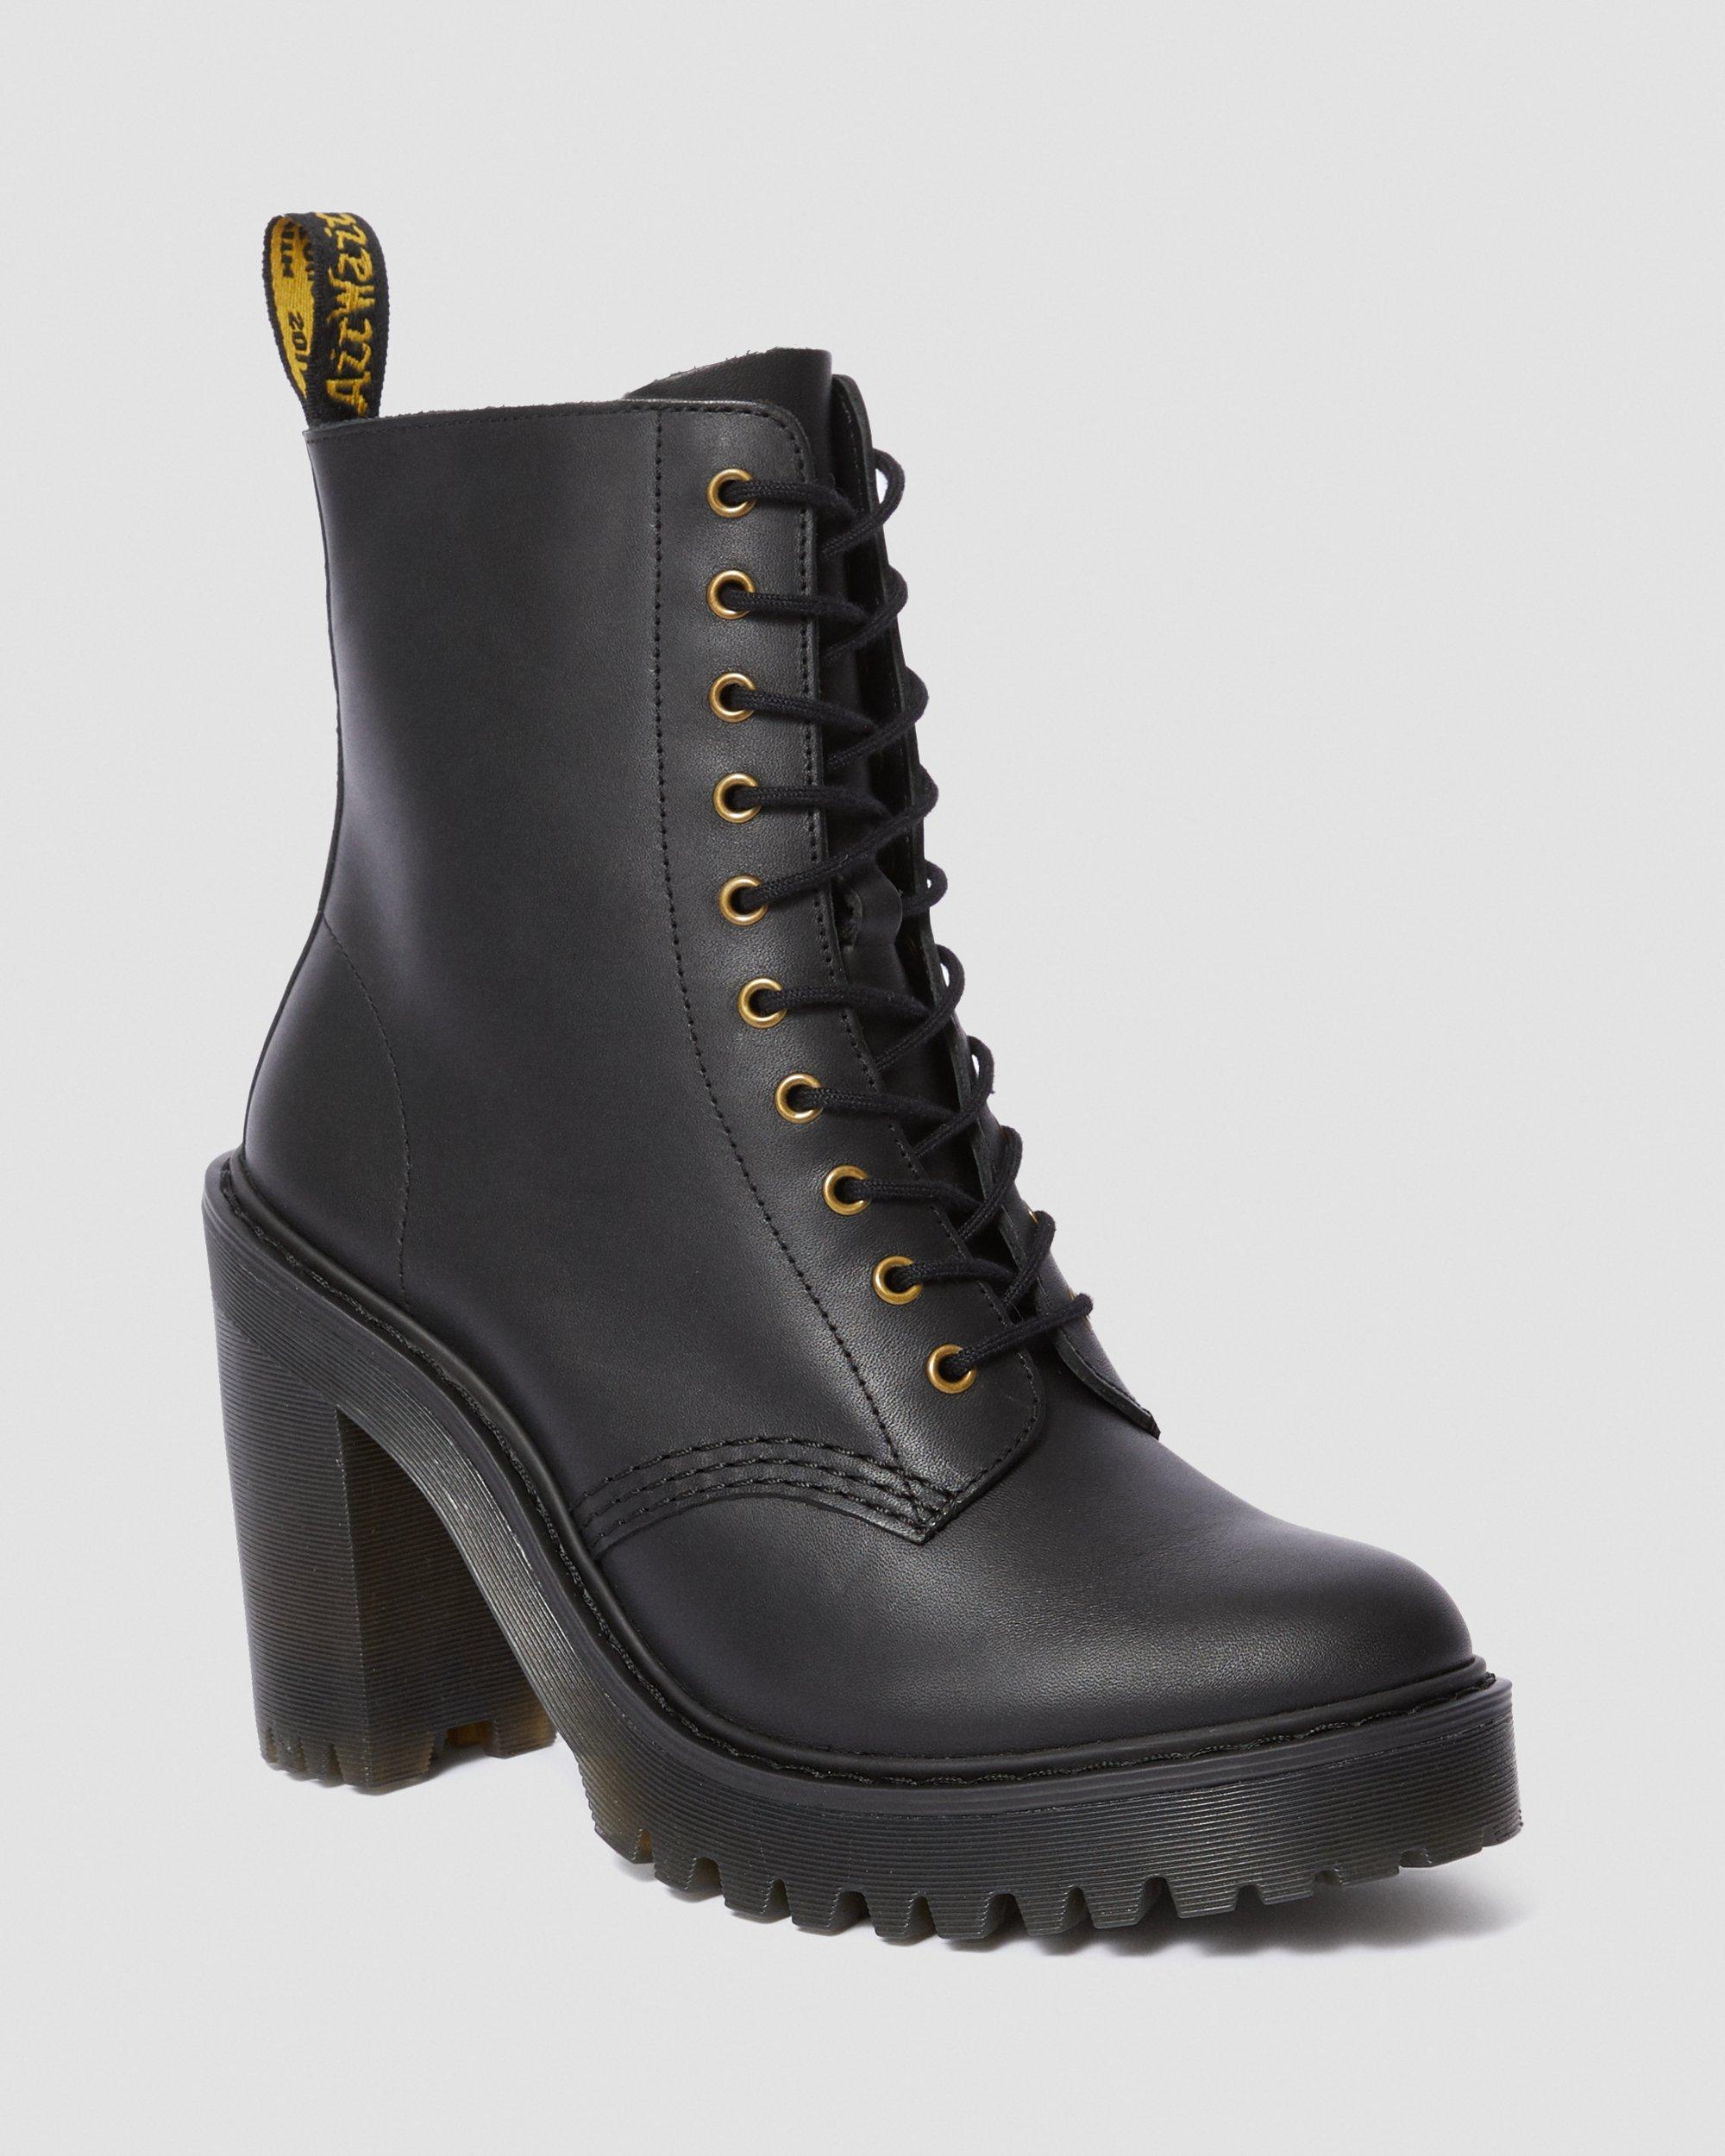 LEATHER HEELED BOOTS | Dr. Martens 